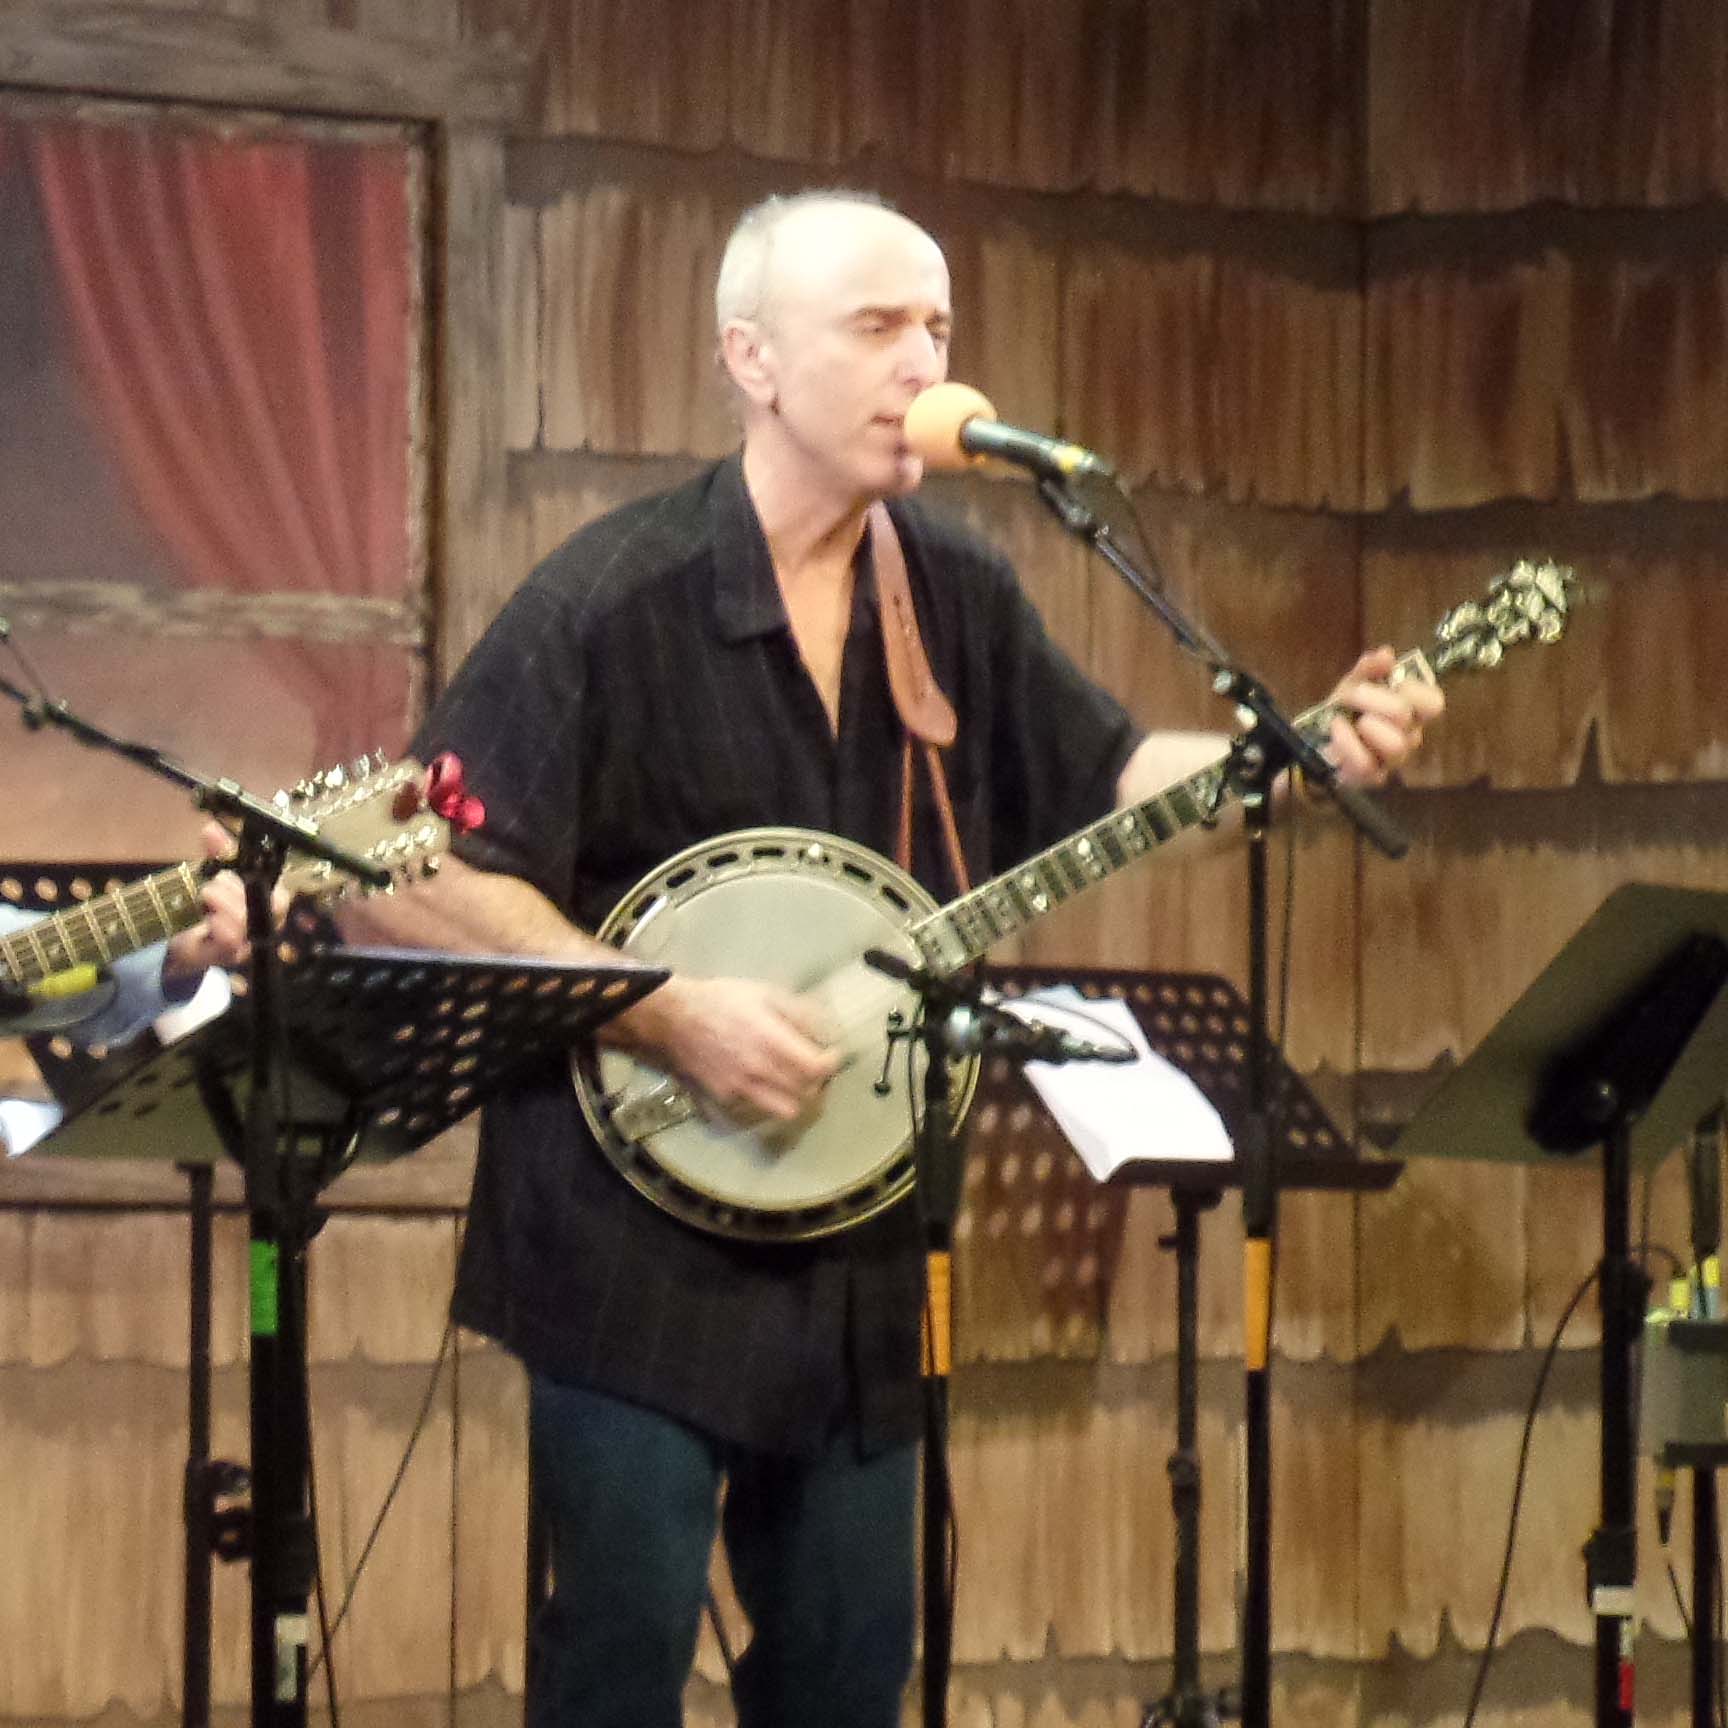 Banjo lessons at the NJ School of Music with Brian Rauch